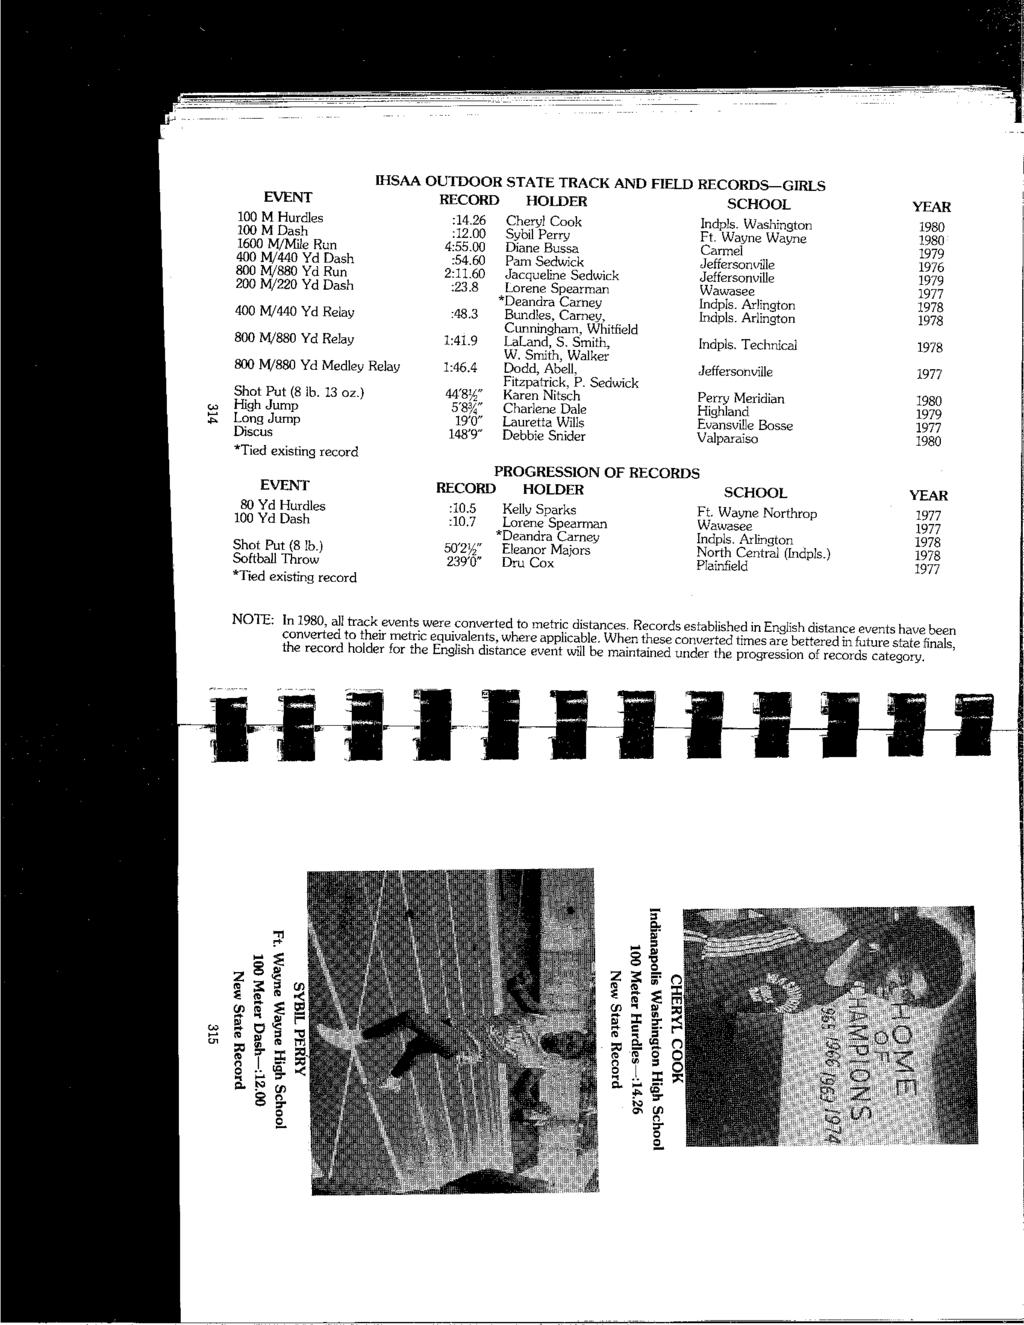 IHSAA OUTDOOR STATE TRACK AND FIELD RECORDS-GIRLS EVENT RECORD HOLDER SCHOOL YEAR,;: " 100 M Hurdles :14.26 Cheryl Cook Indpls. Washington 1980 100 M Dash :12.00 Sybil Perry Ft.